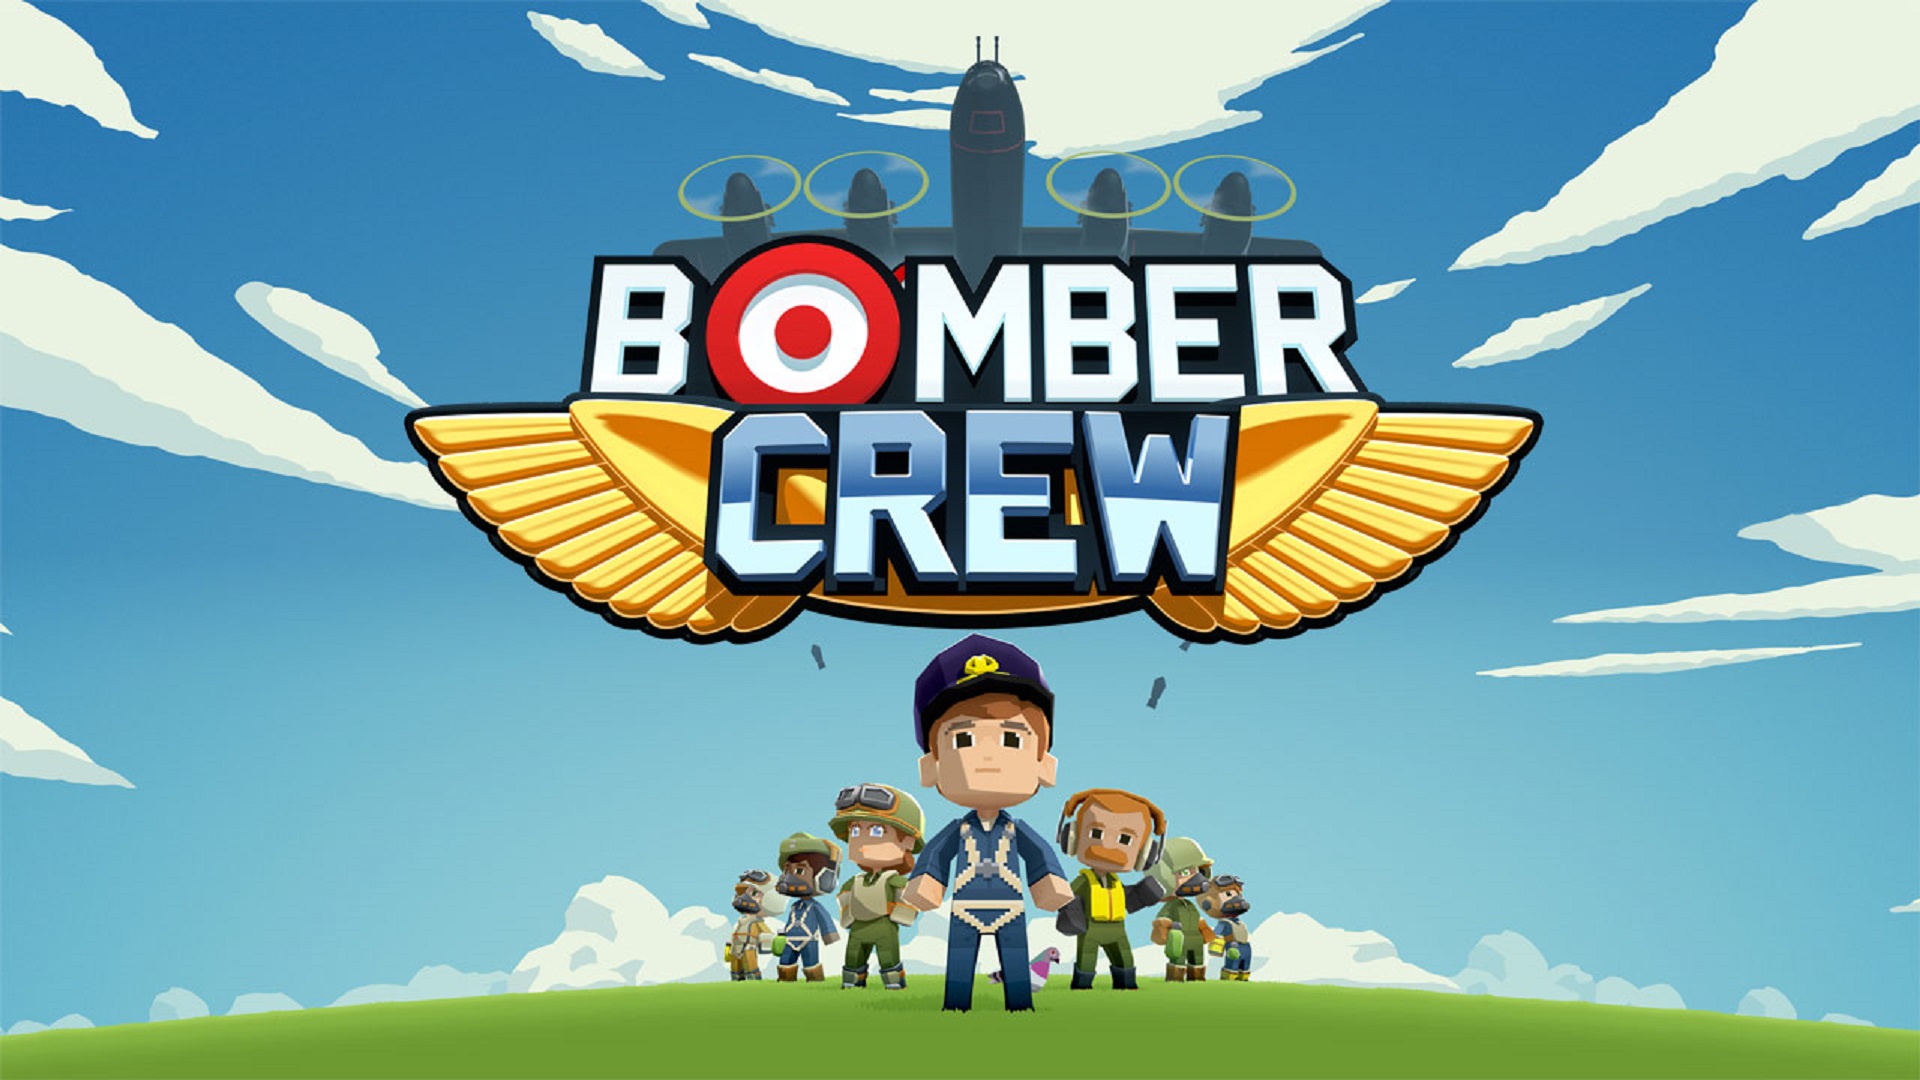 Bomber grounds steam фото 60